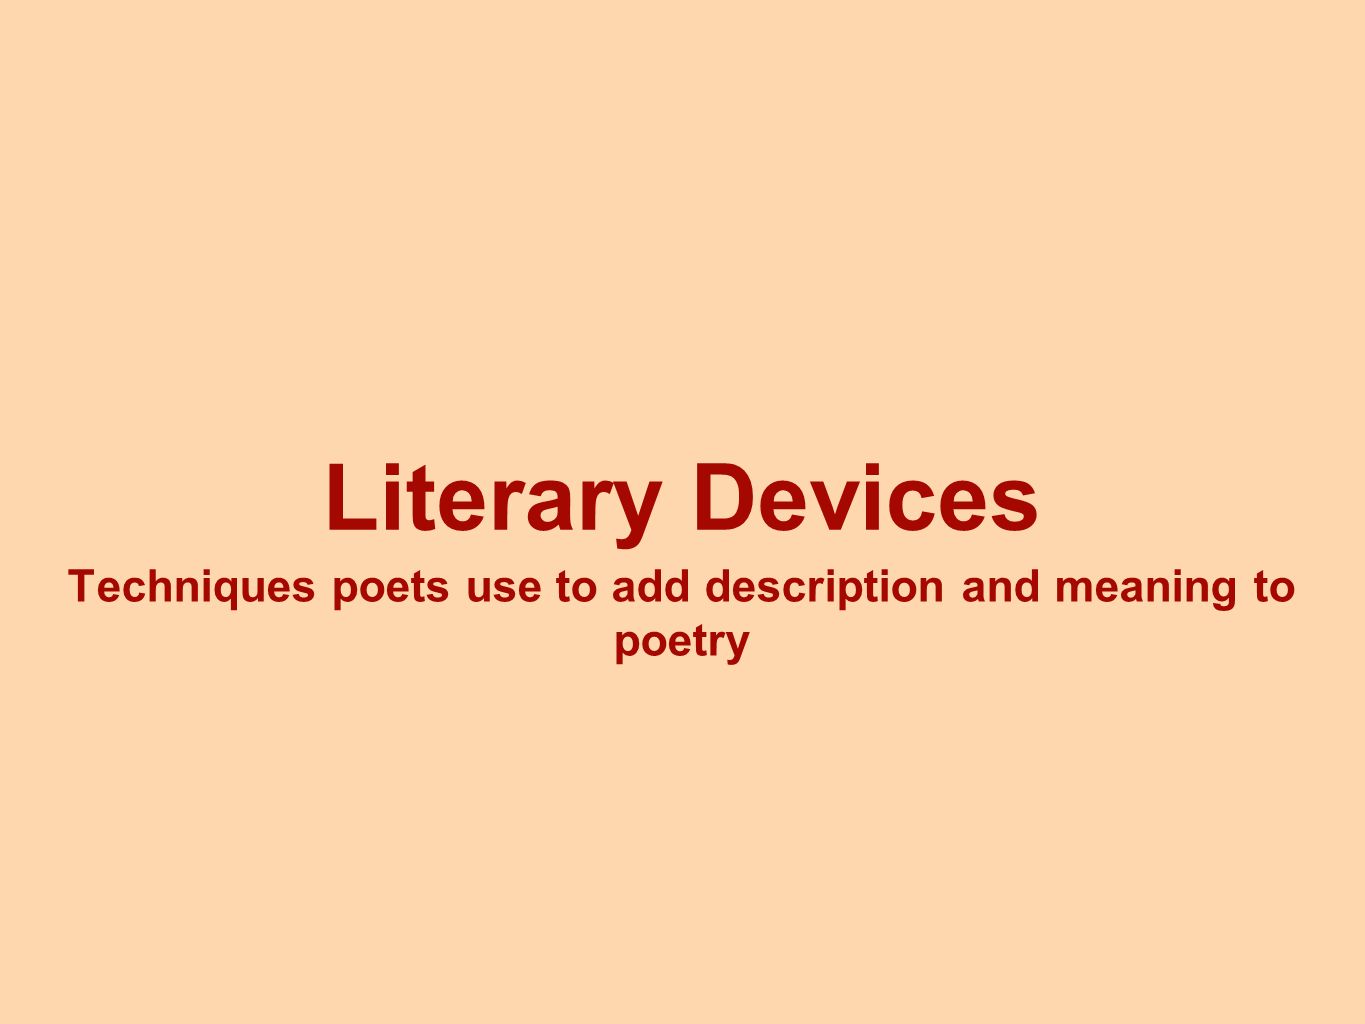 Literary Devices Techniques poets use to add description and meaning to poetry